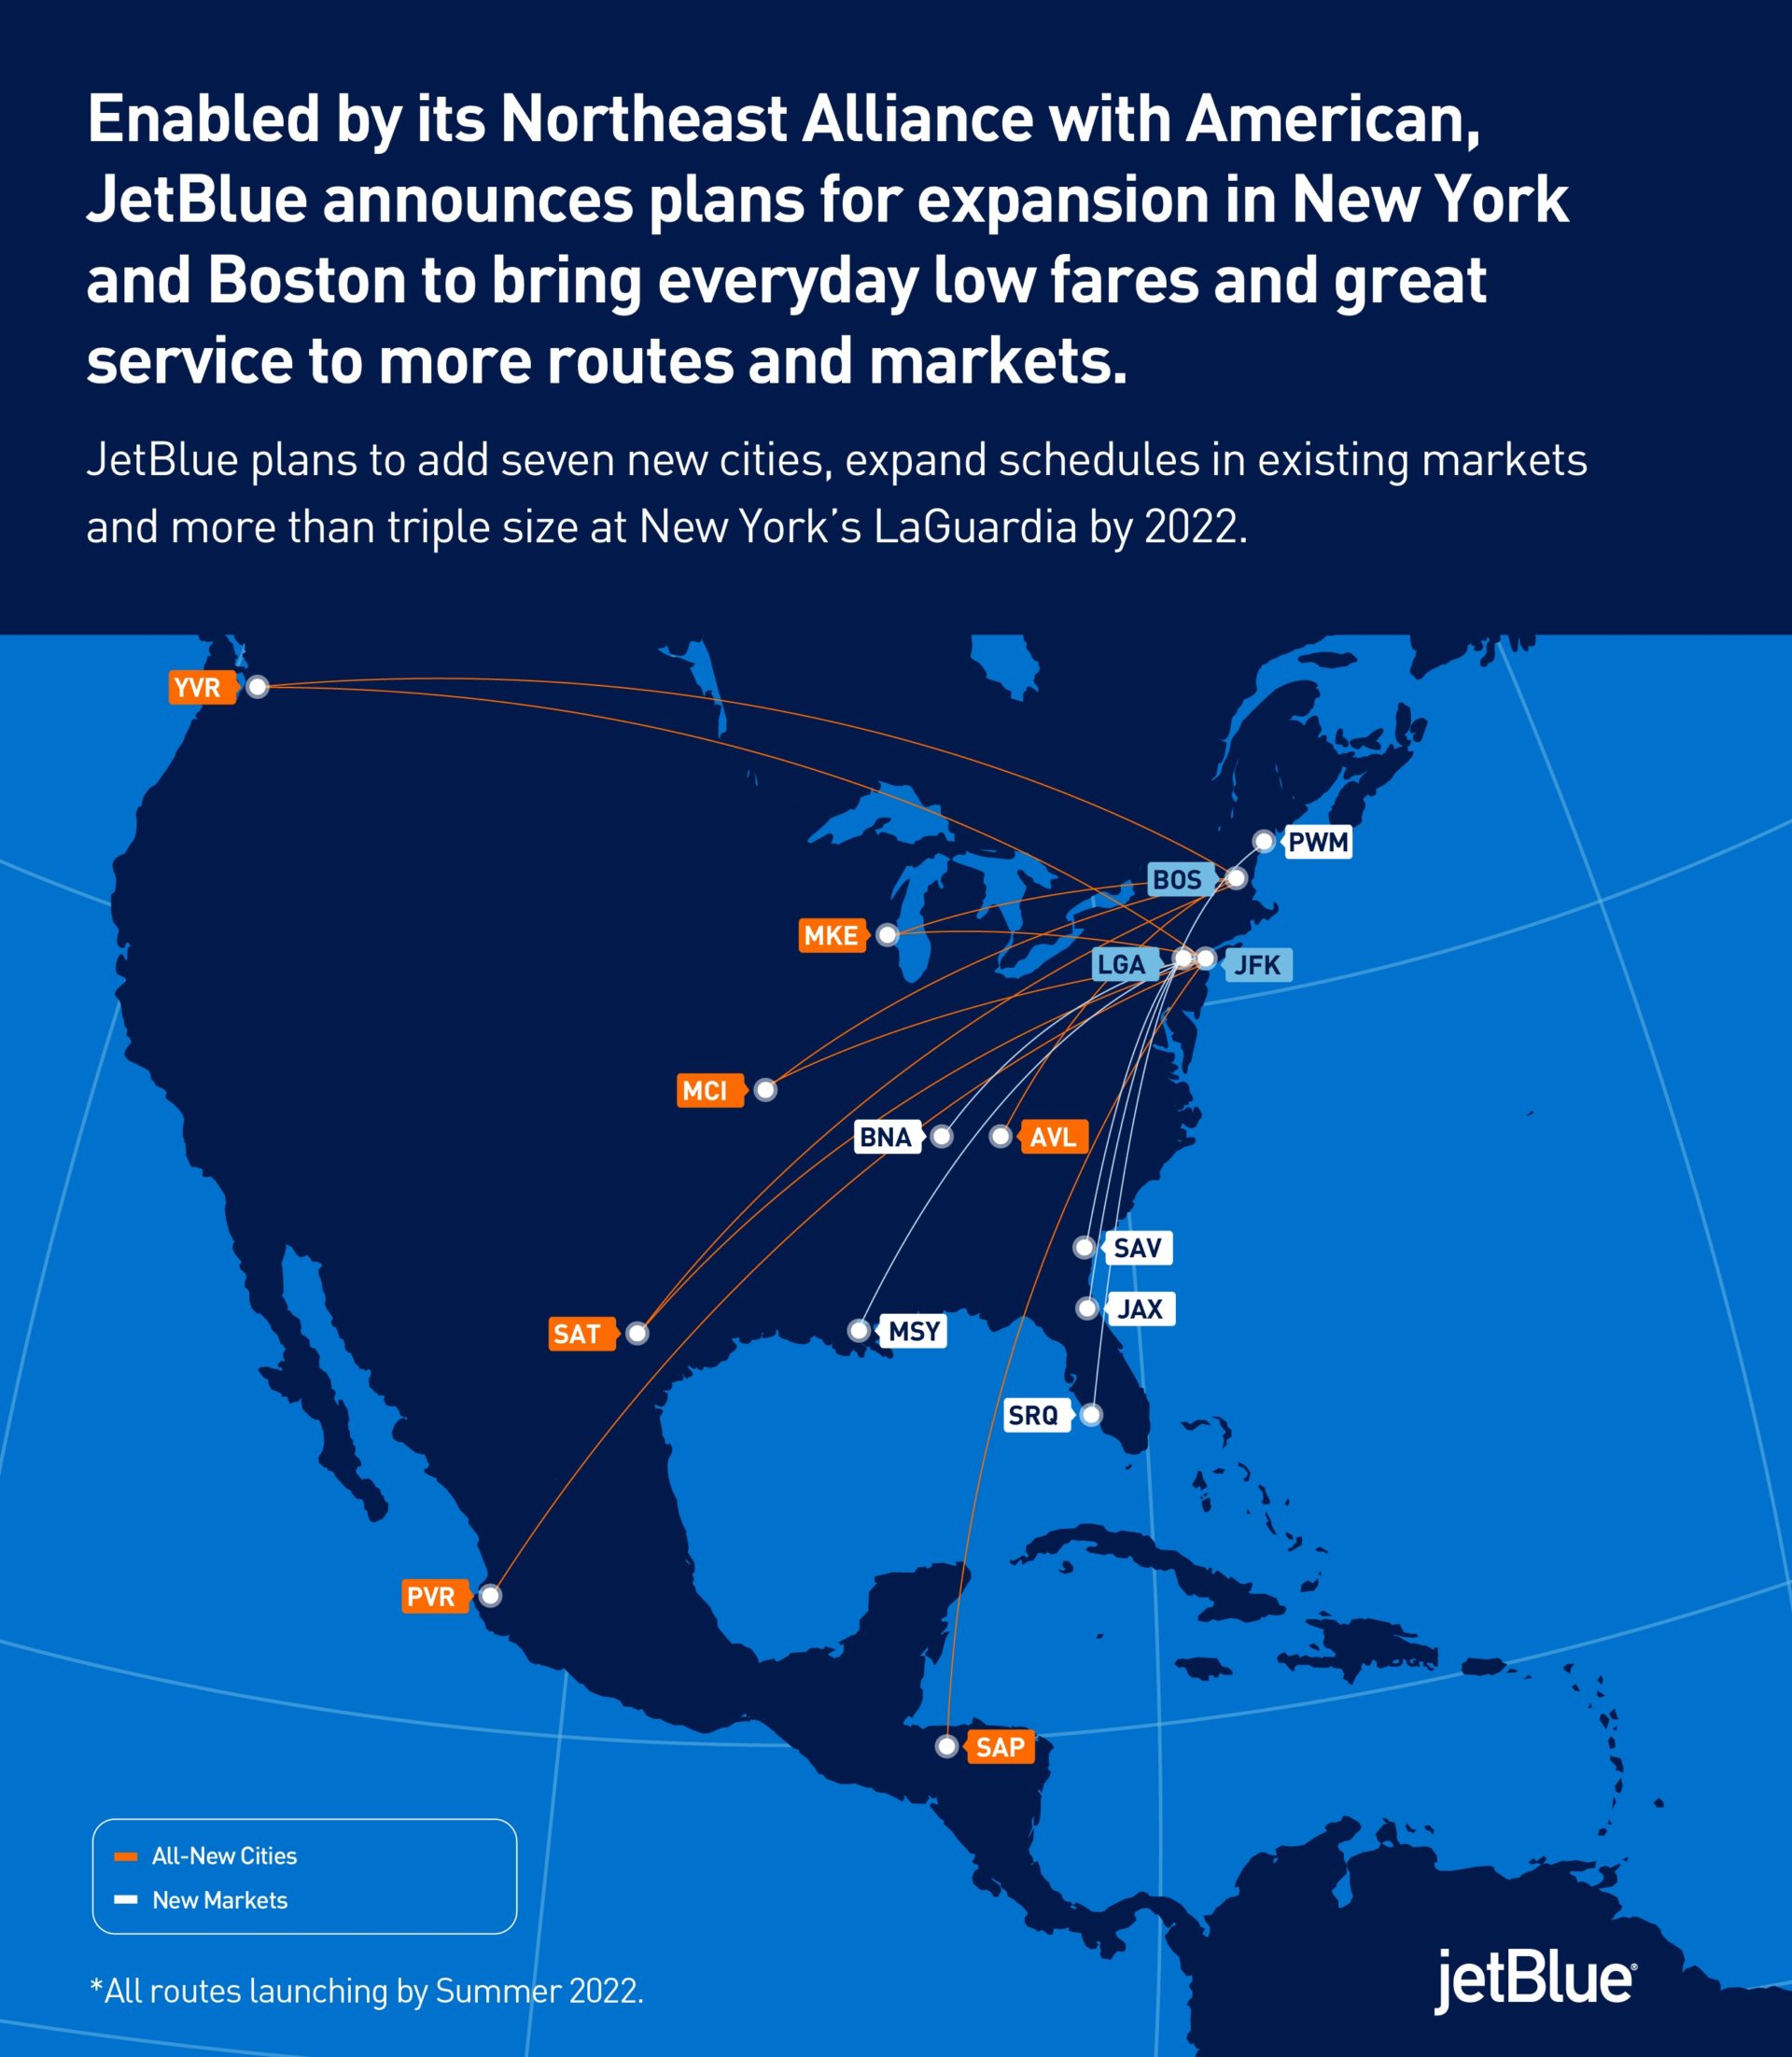 JetBlue Adds 7 New Cities, Expands Partnership with American Airlines